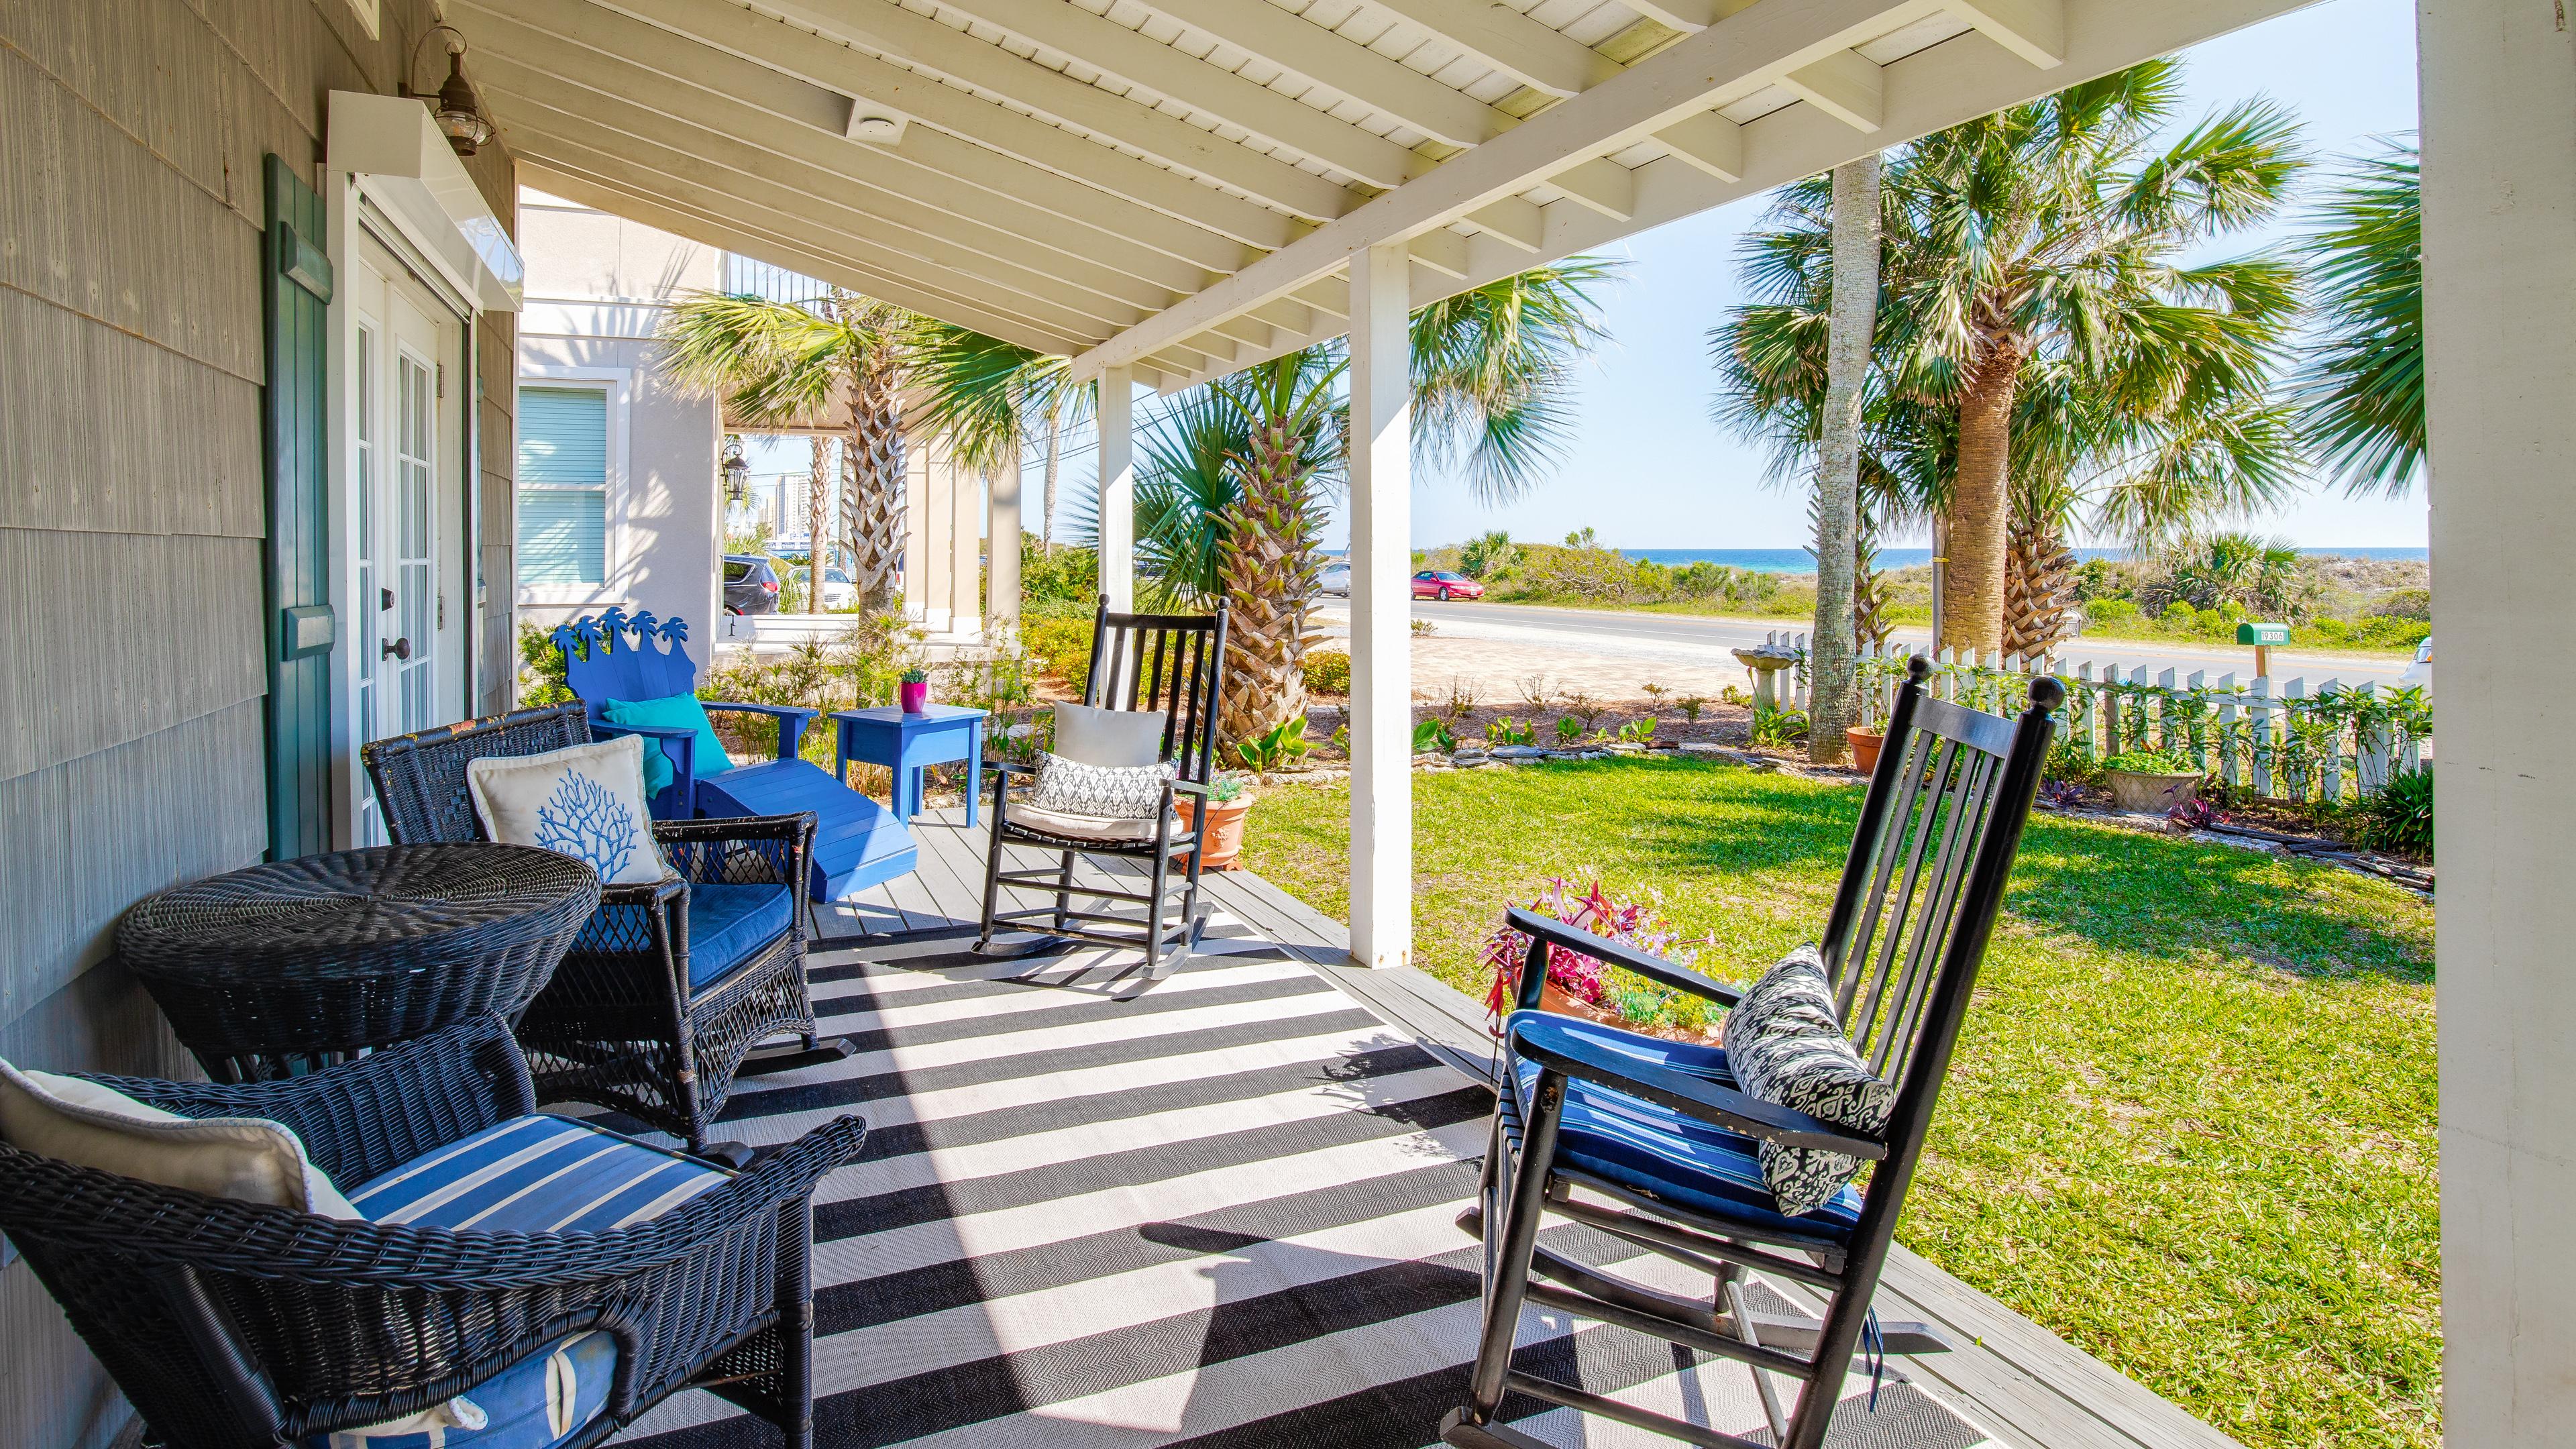 Plenty of seating on the porch for everyone to enjoy morning coffee before a beach day. 